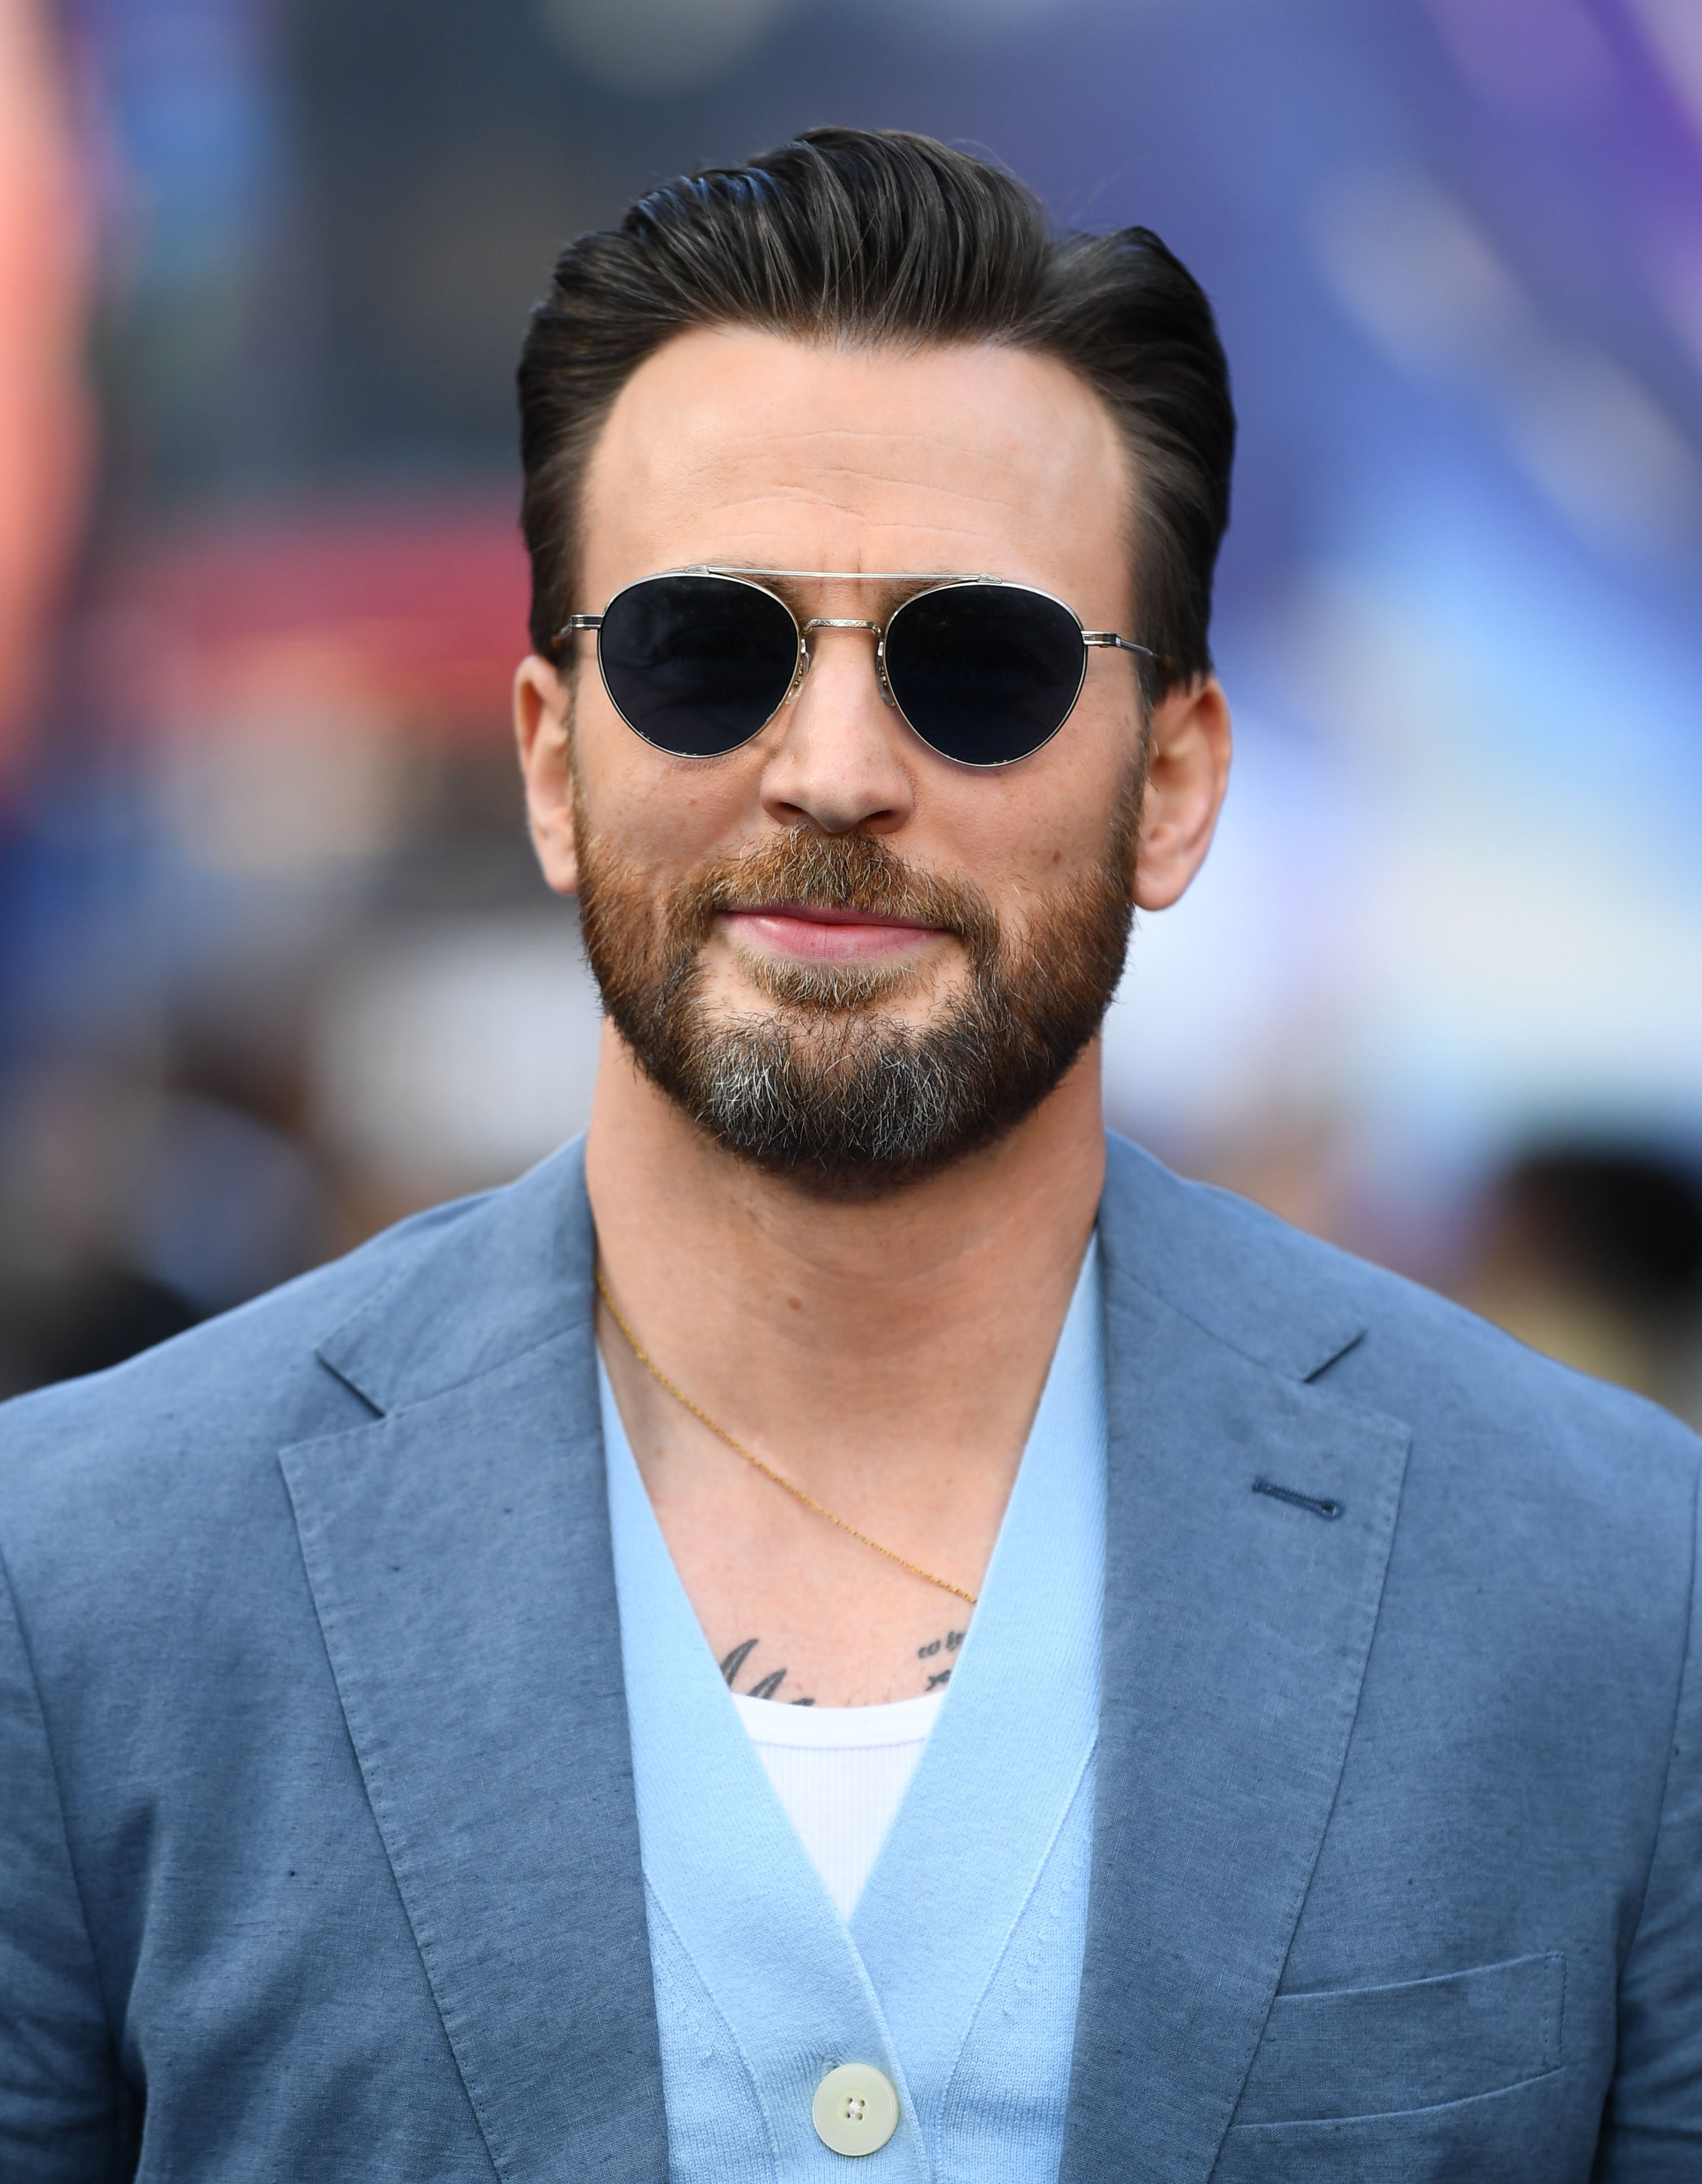 Fans go crazy after Chris Evans shows rare glimpse at chest tattoos